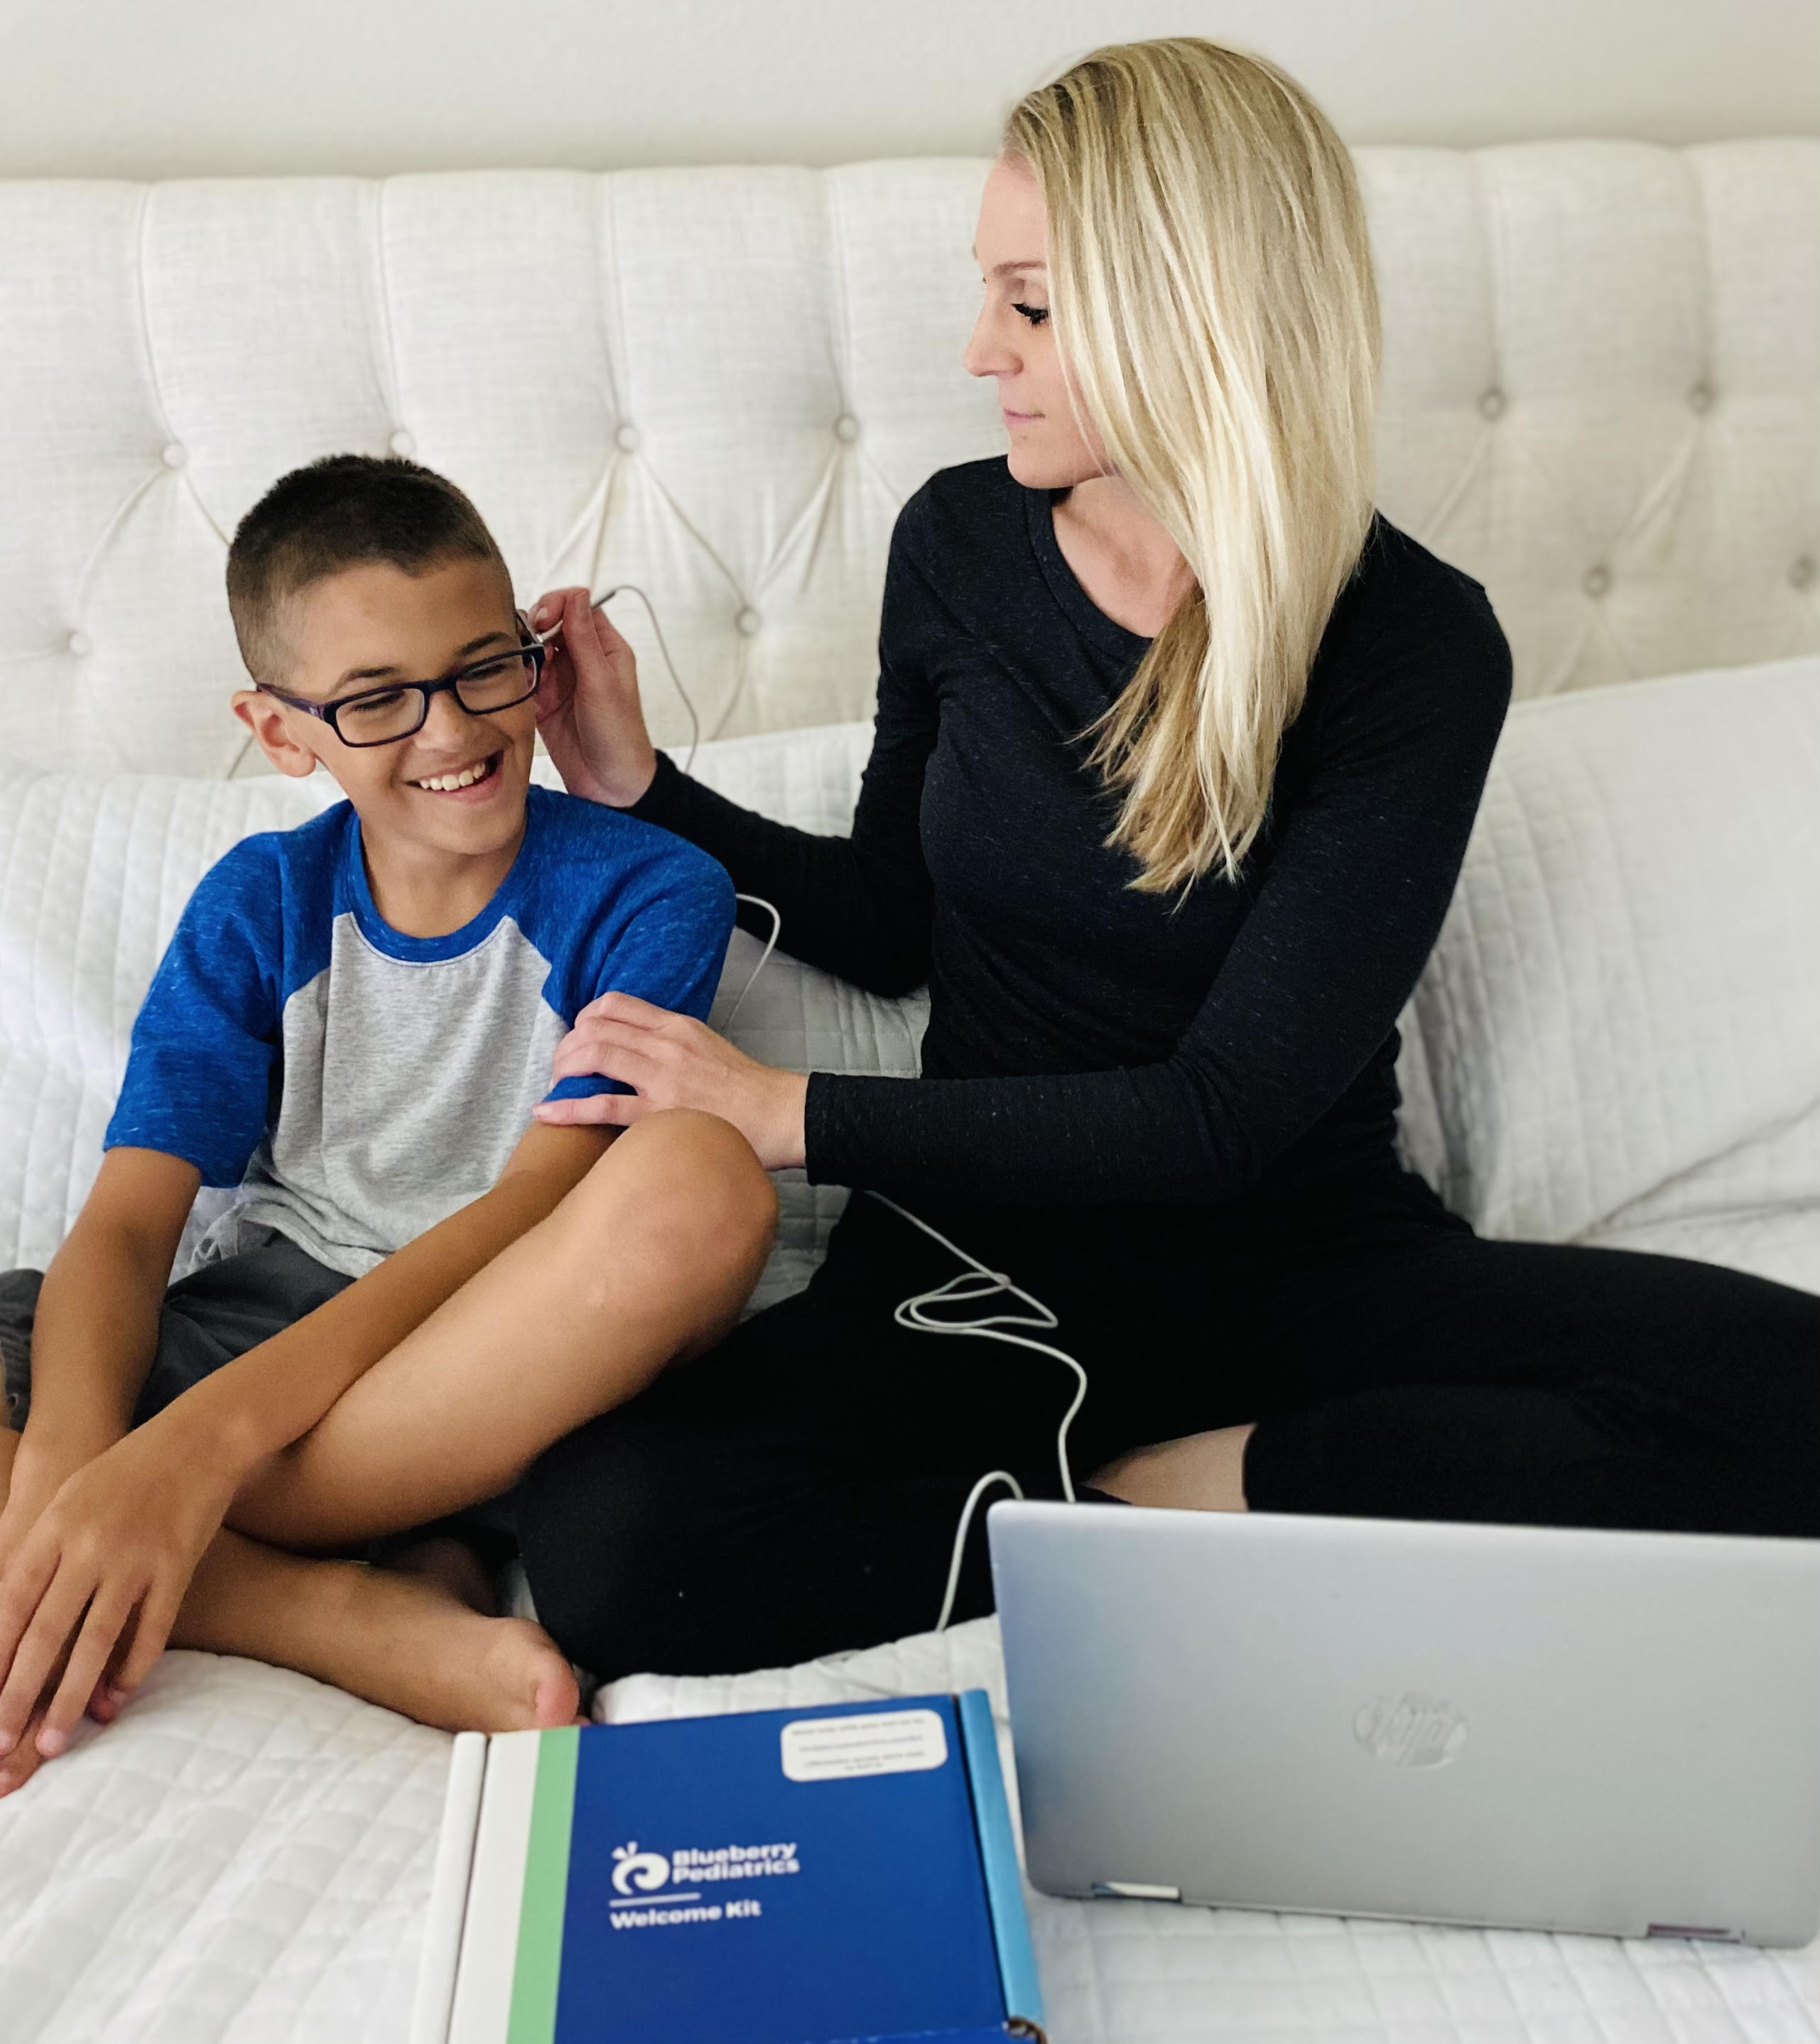 The online pediatricians at Blueberry Pediatrics make it easy to have a telehealth appointment for your kids in the comfort of your own home and in your jammies ;)